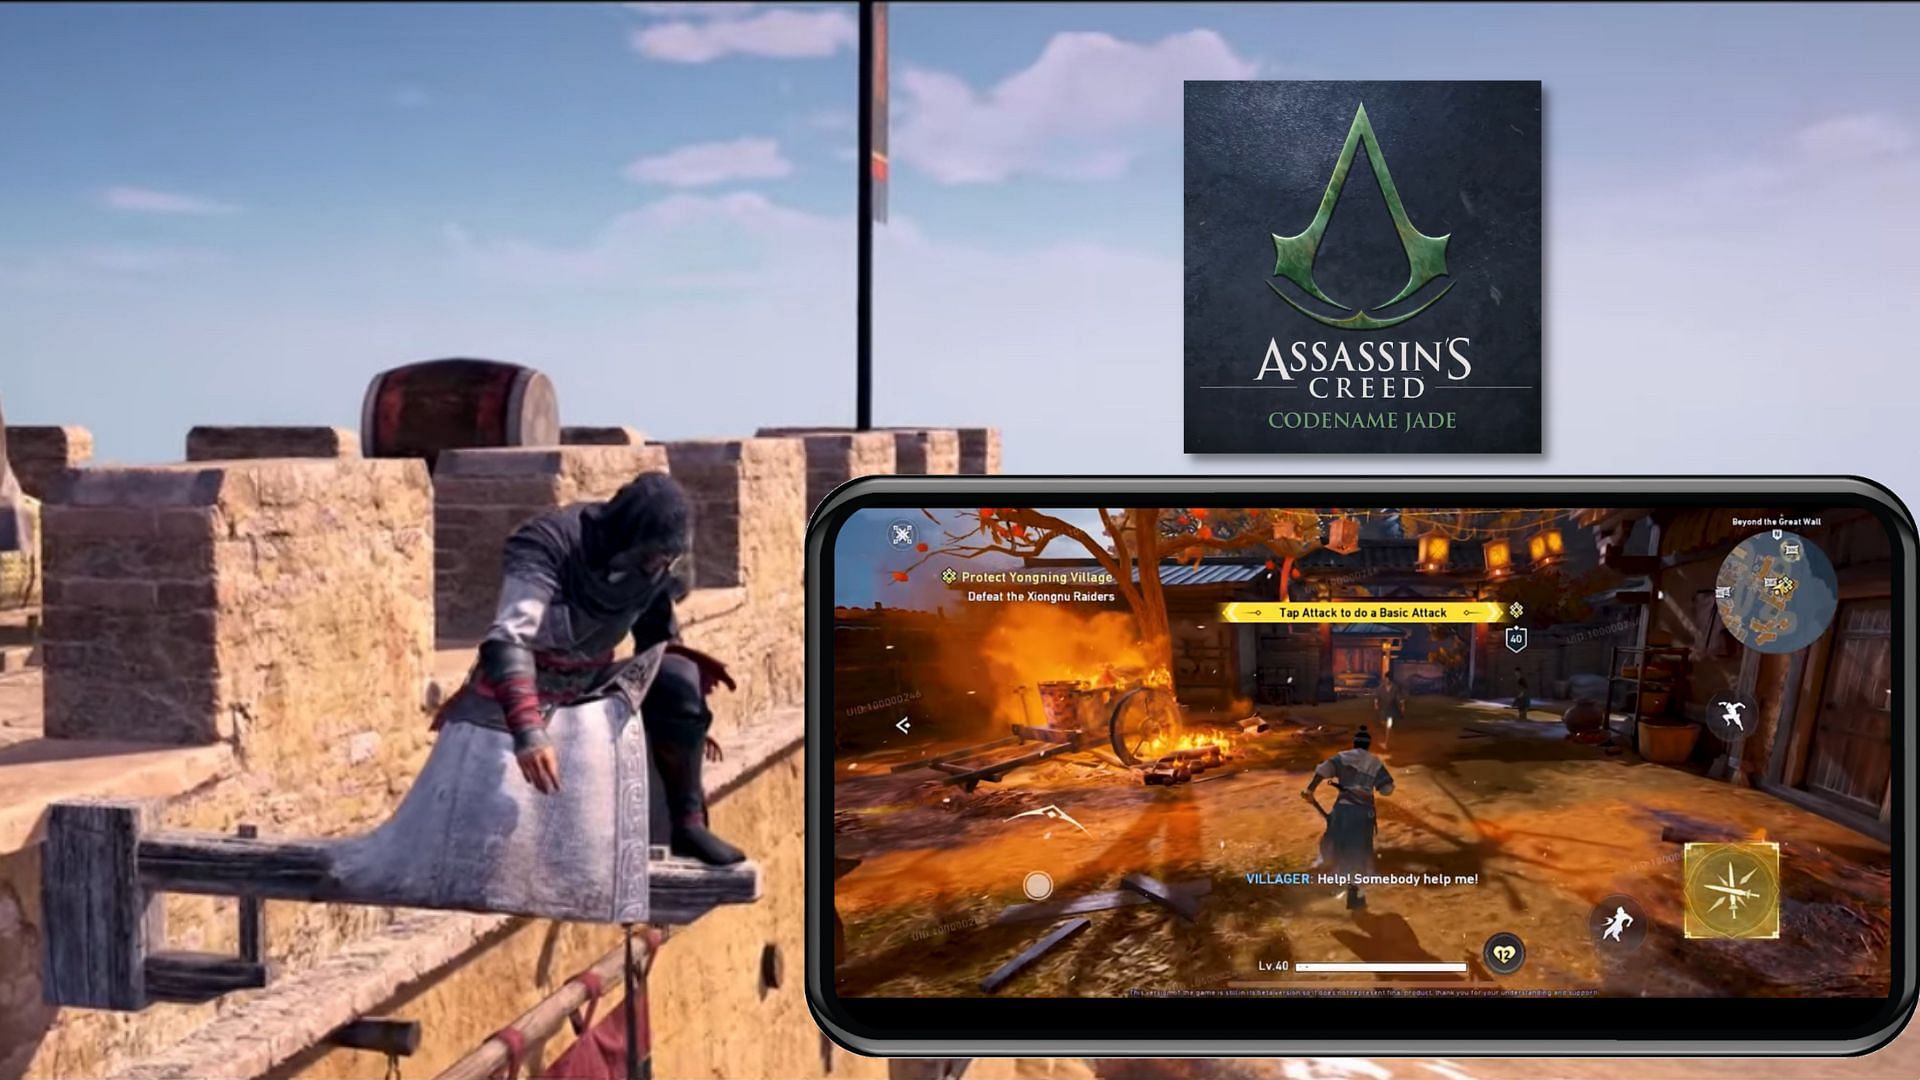 Assassins Creed Codename Jade Leaked Gameplay Locations Graphics And More